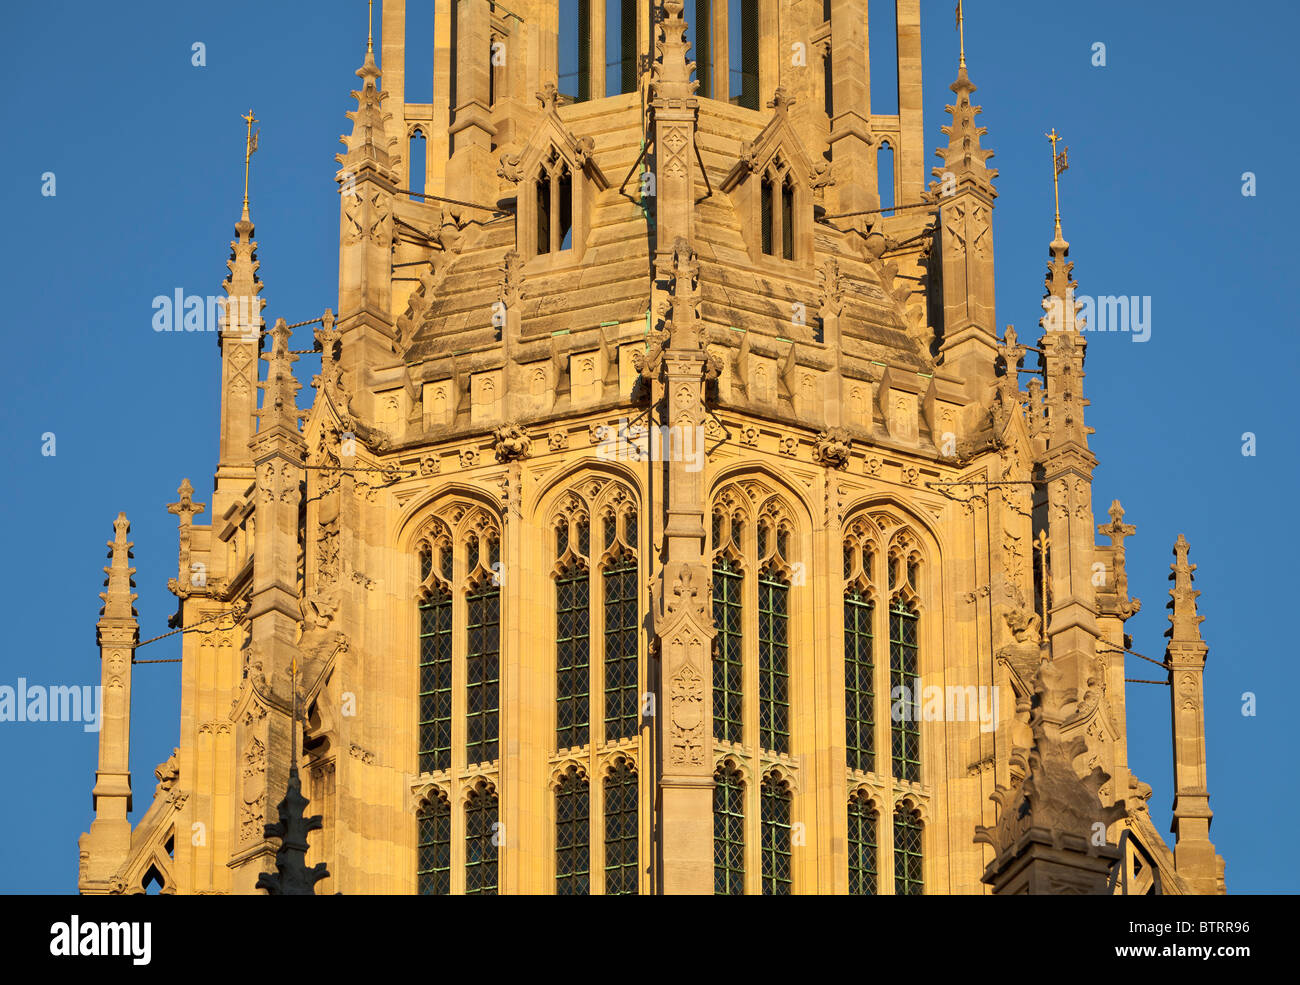 The central tower at the house of parliament bathed in sunset light, london, england Stock Photo